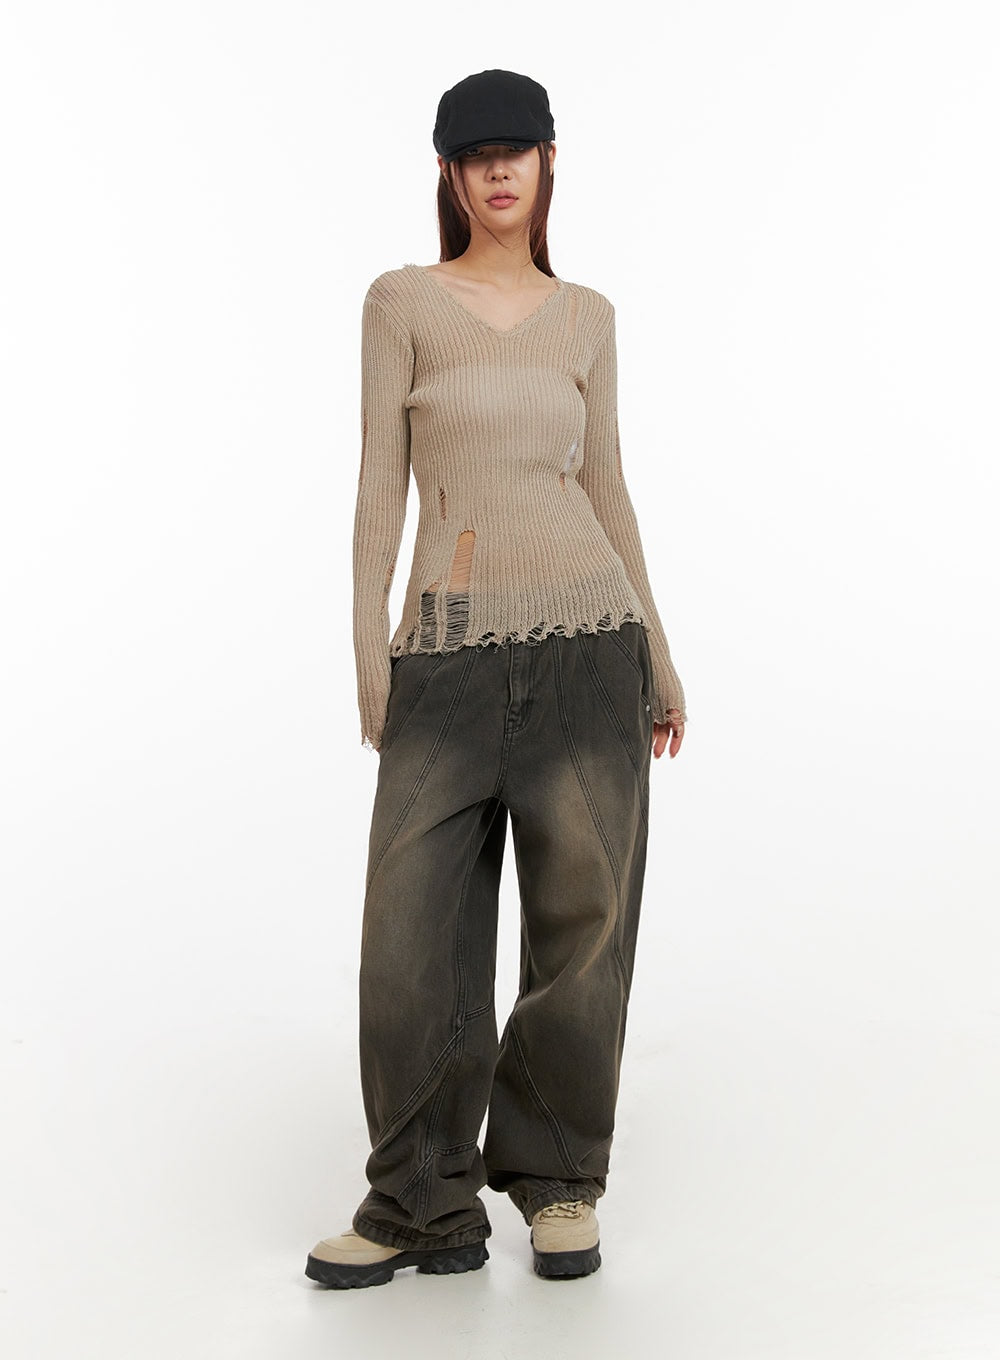 sheer-distressed-v-neck-sweater-iy410